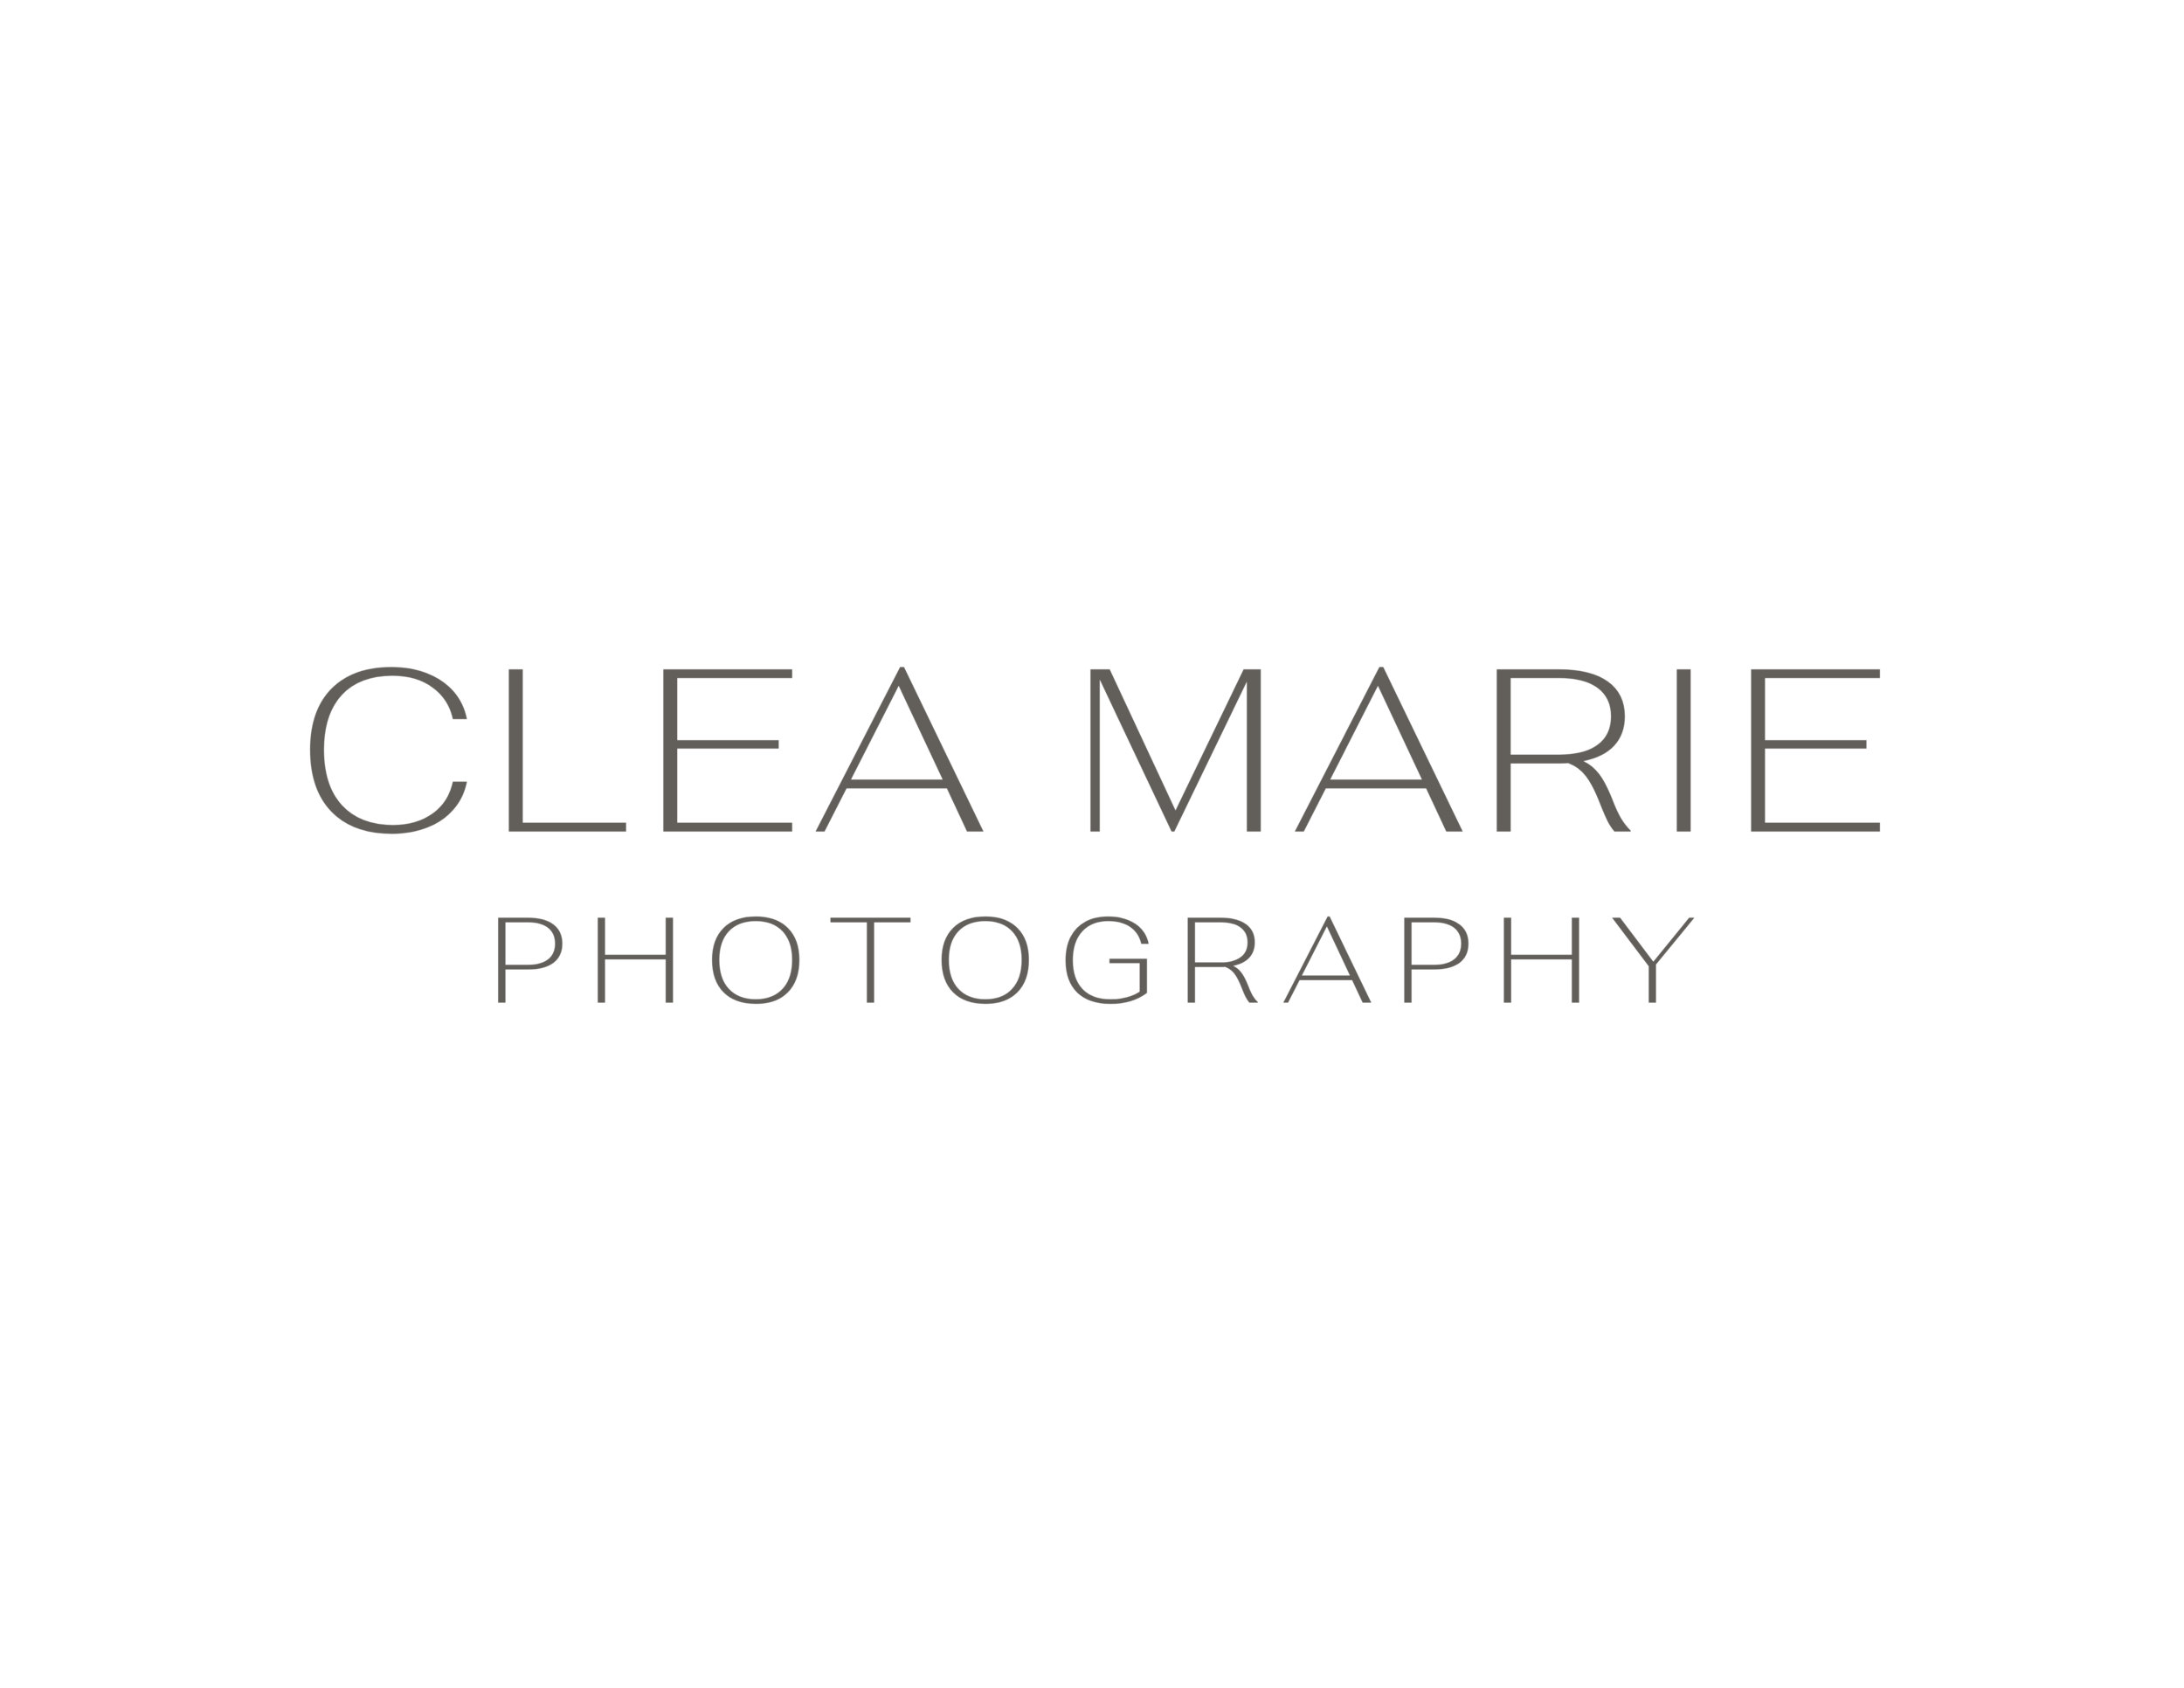 Clea Marie Photography